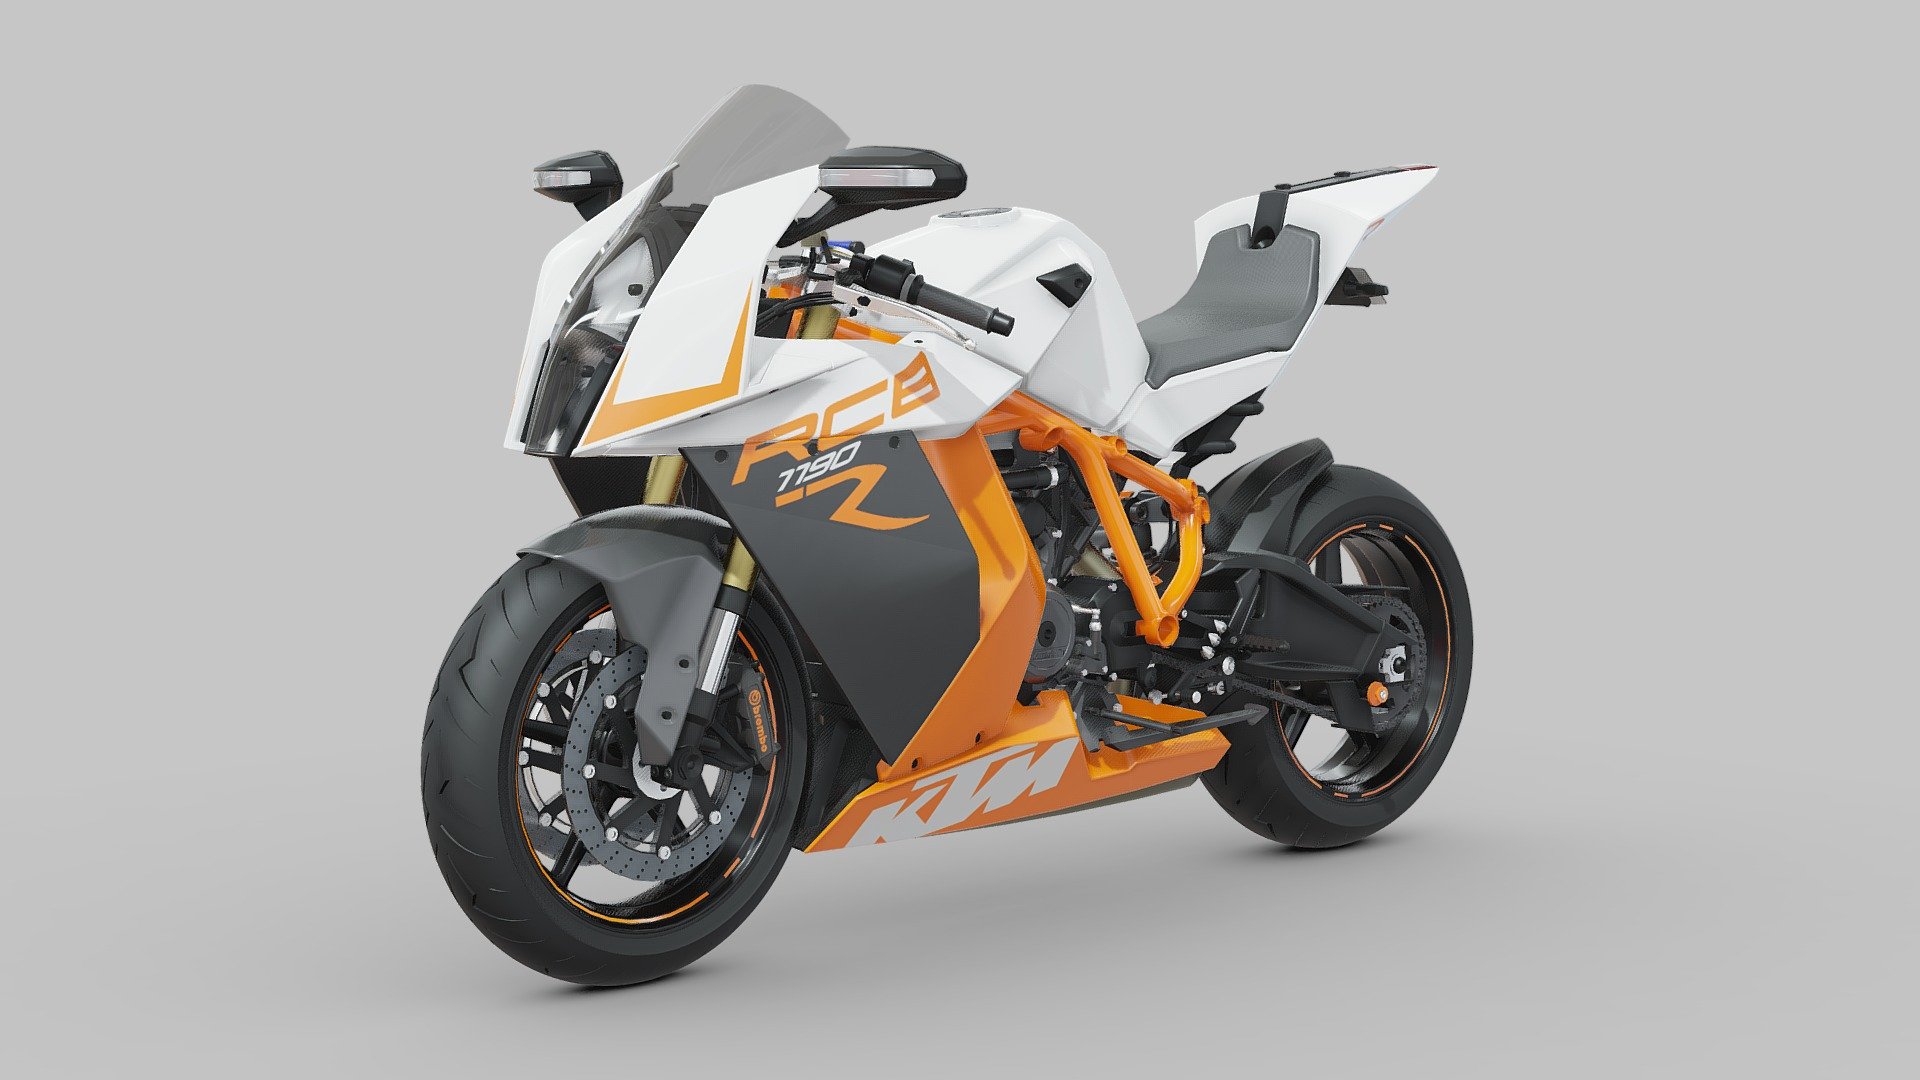 The KTM 1190 RC8 R is a high-performance sportbike designed to deliver exhilarating performance and precision handling on both the road and the track. Manufactured by the renowned Austrian motorcycle manufacturer KTM, the RC8 R is engineered with a focus on agility, power, and advanced technology. 
the heart of the RC8 R is a potent 1,195cc V-twin engine, meticulously tuned to deliver impressive power and torque throughout the rev range. With advanced fuel injection and a lightweight chassis, the RC8 R offers razor-sharp throttle response and precise control, ensuring an adrenaline-fueled riding experience. Equipped with advanced features such as adjustable suspension, Brembo brakes, and traction control, the KTM 1190 RC8 R offers exceptional handling and braking performance, making it a formidable contender on the racetrack or spirited canyon roads. For riders seeking a thrilling and uncompromising sportbike experience, the KTM 1190 RC8 R delivers adrenaline-fueled performance in a sleek and stylish package 3d model